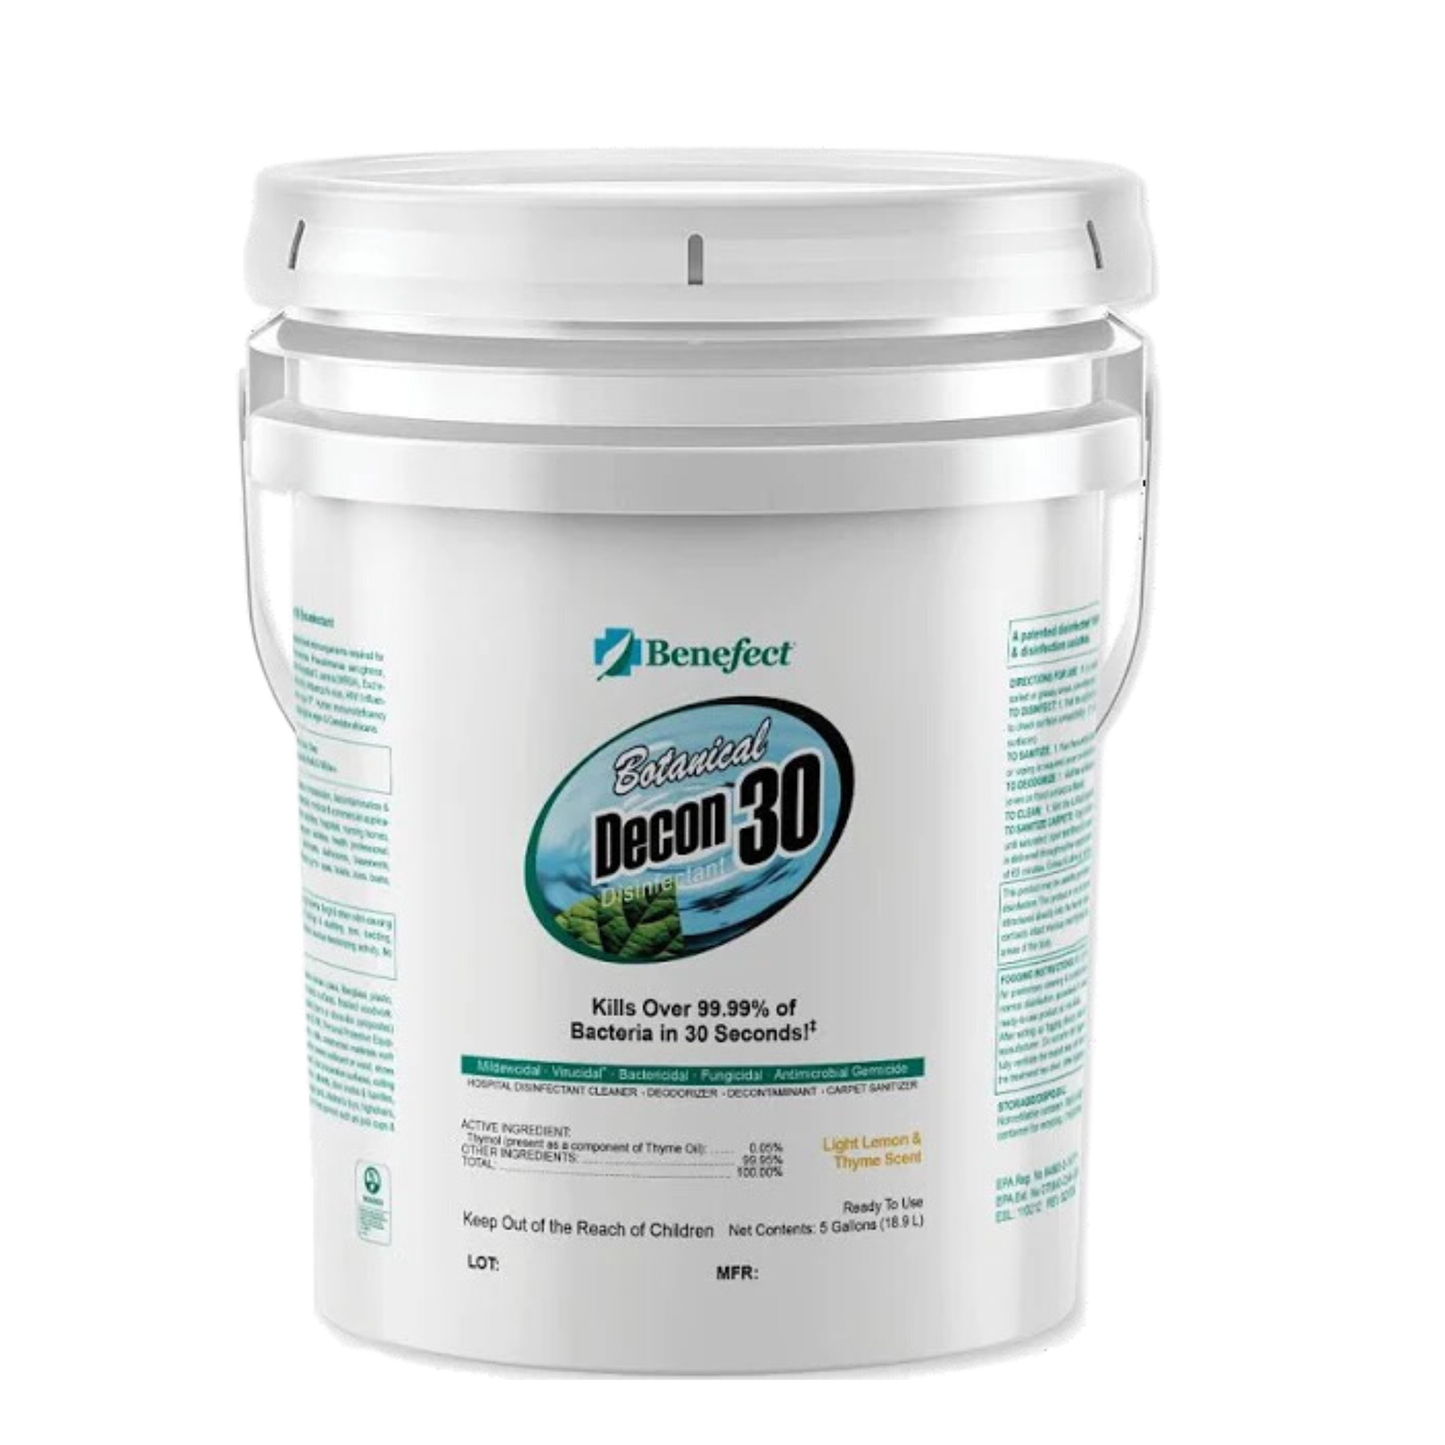 Benefect Botanical Decon 30 Disinfectant Cleaner Misc 5 gal